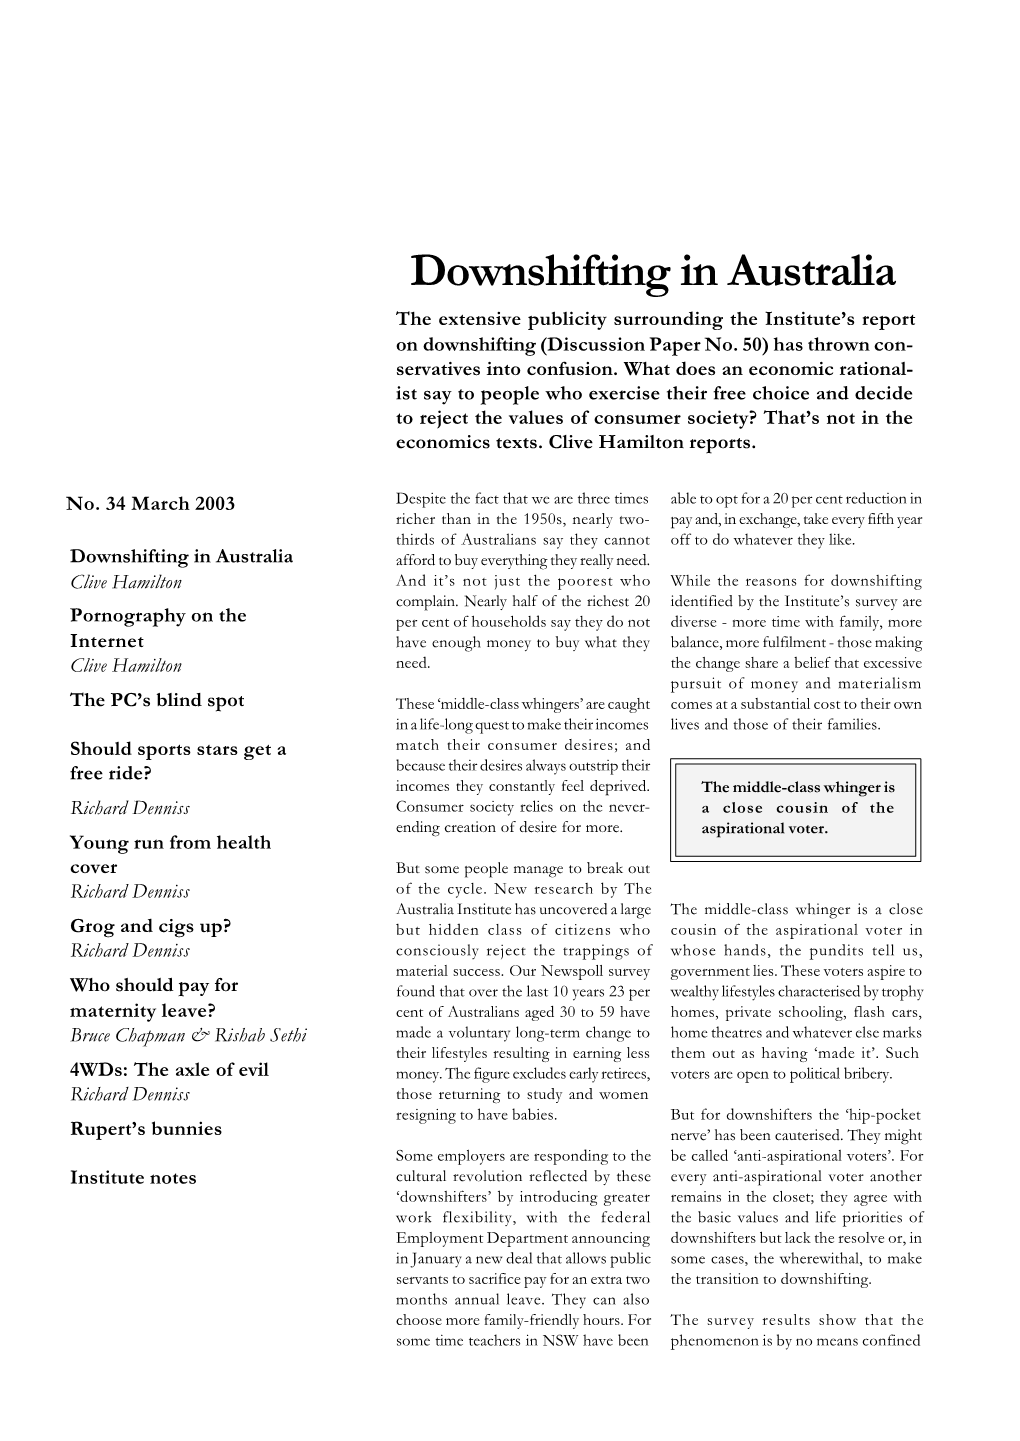 Downshifting in Australia the Extensive Publicity Surrounding the Institute’S Report on Downshifting (Discussion Paper No